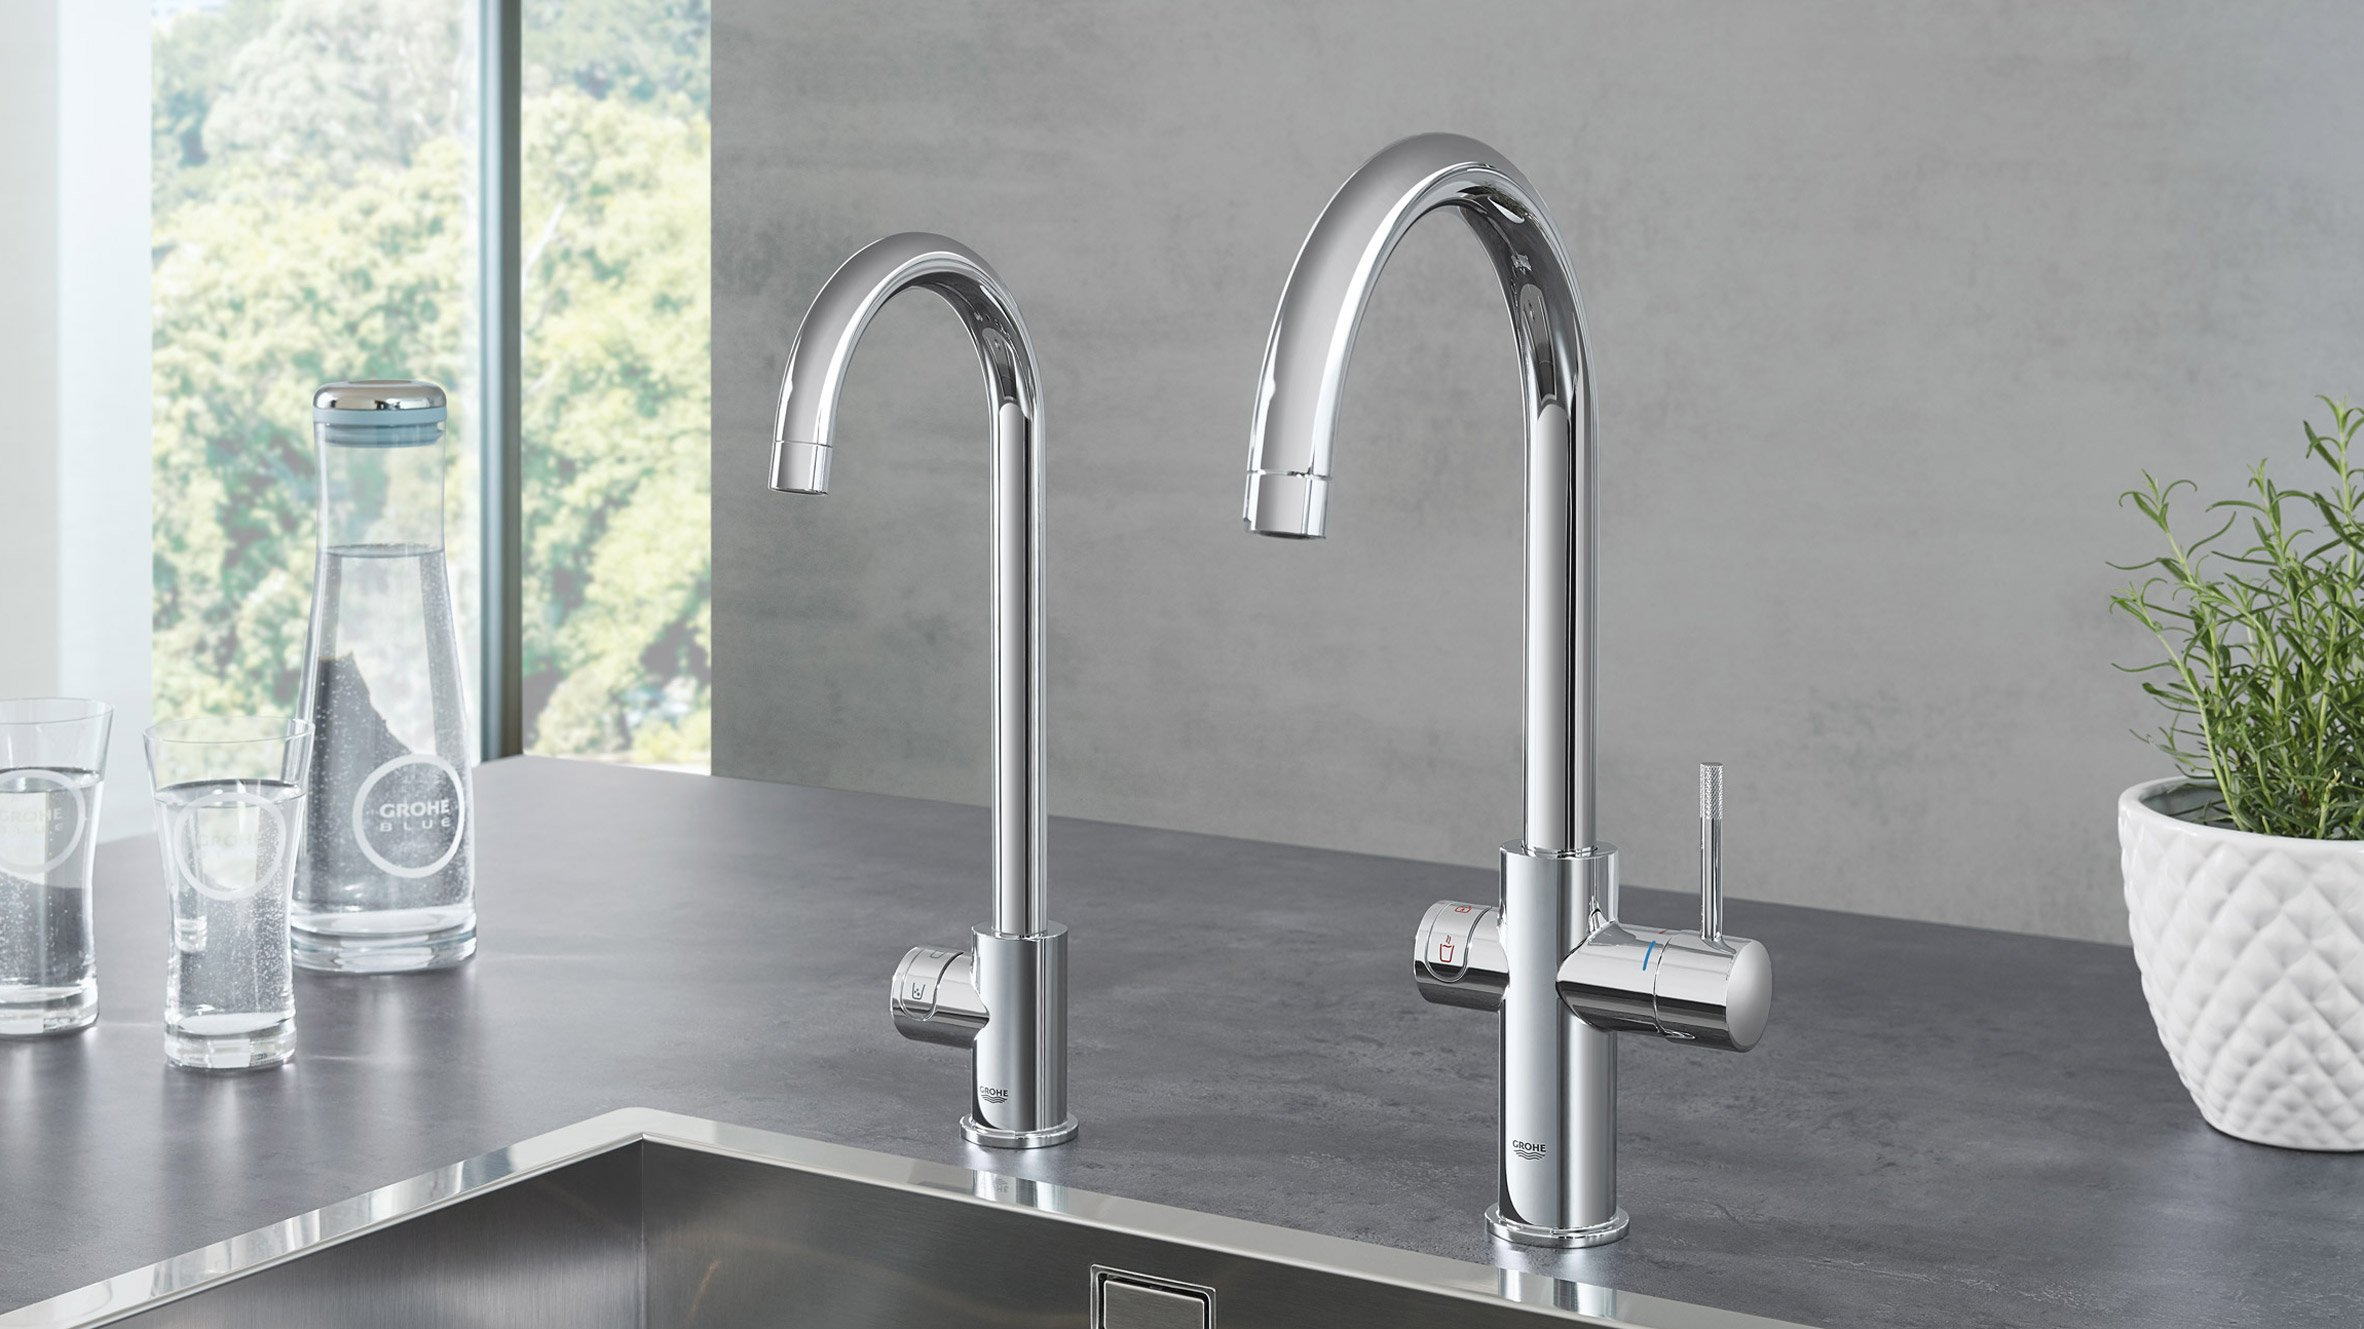 Wonen Pidgin Onbevreesd Grohe's Blue Home and Red taps provide instant boiling or sparkling water